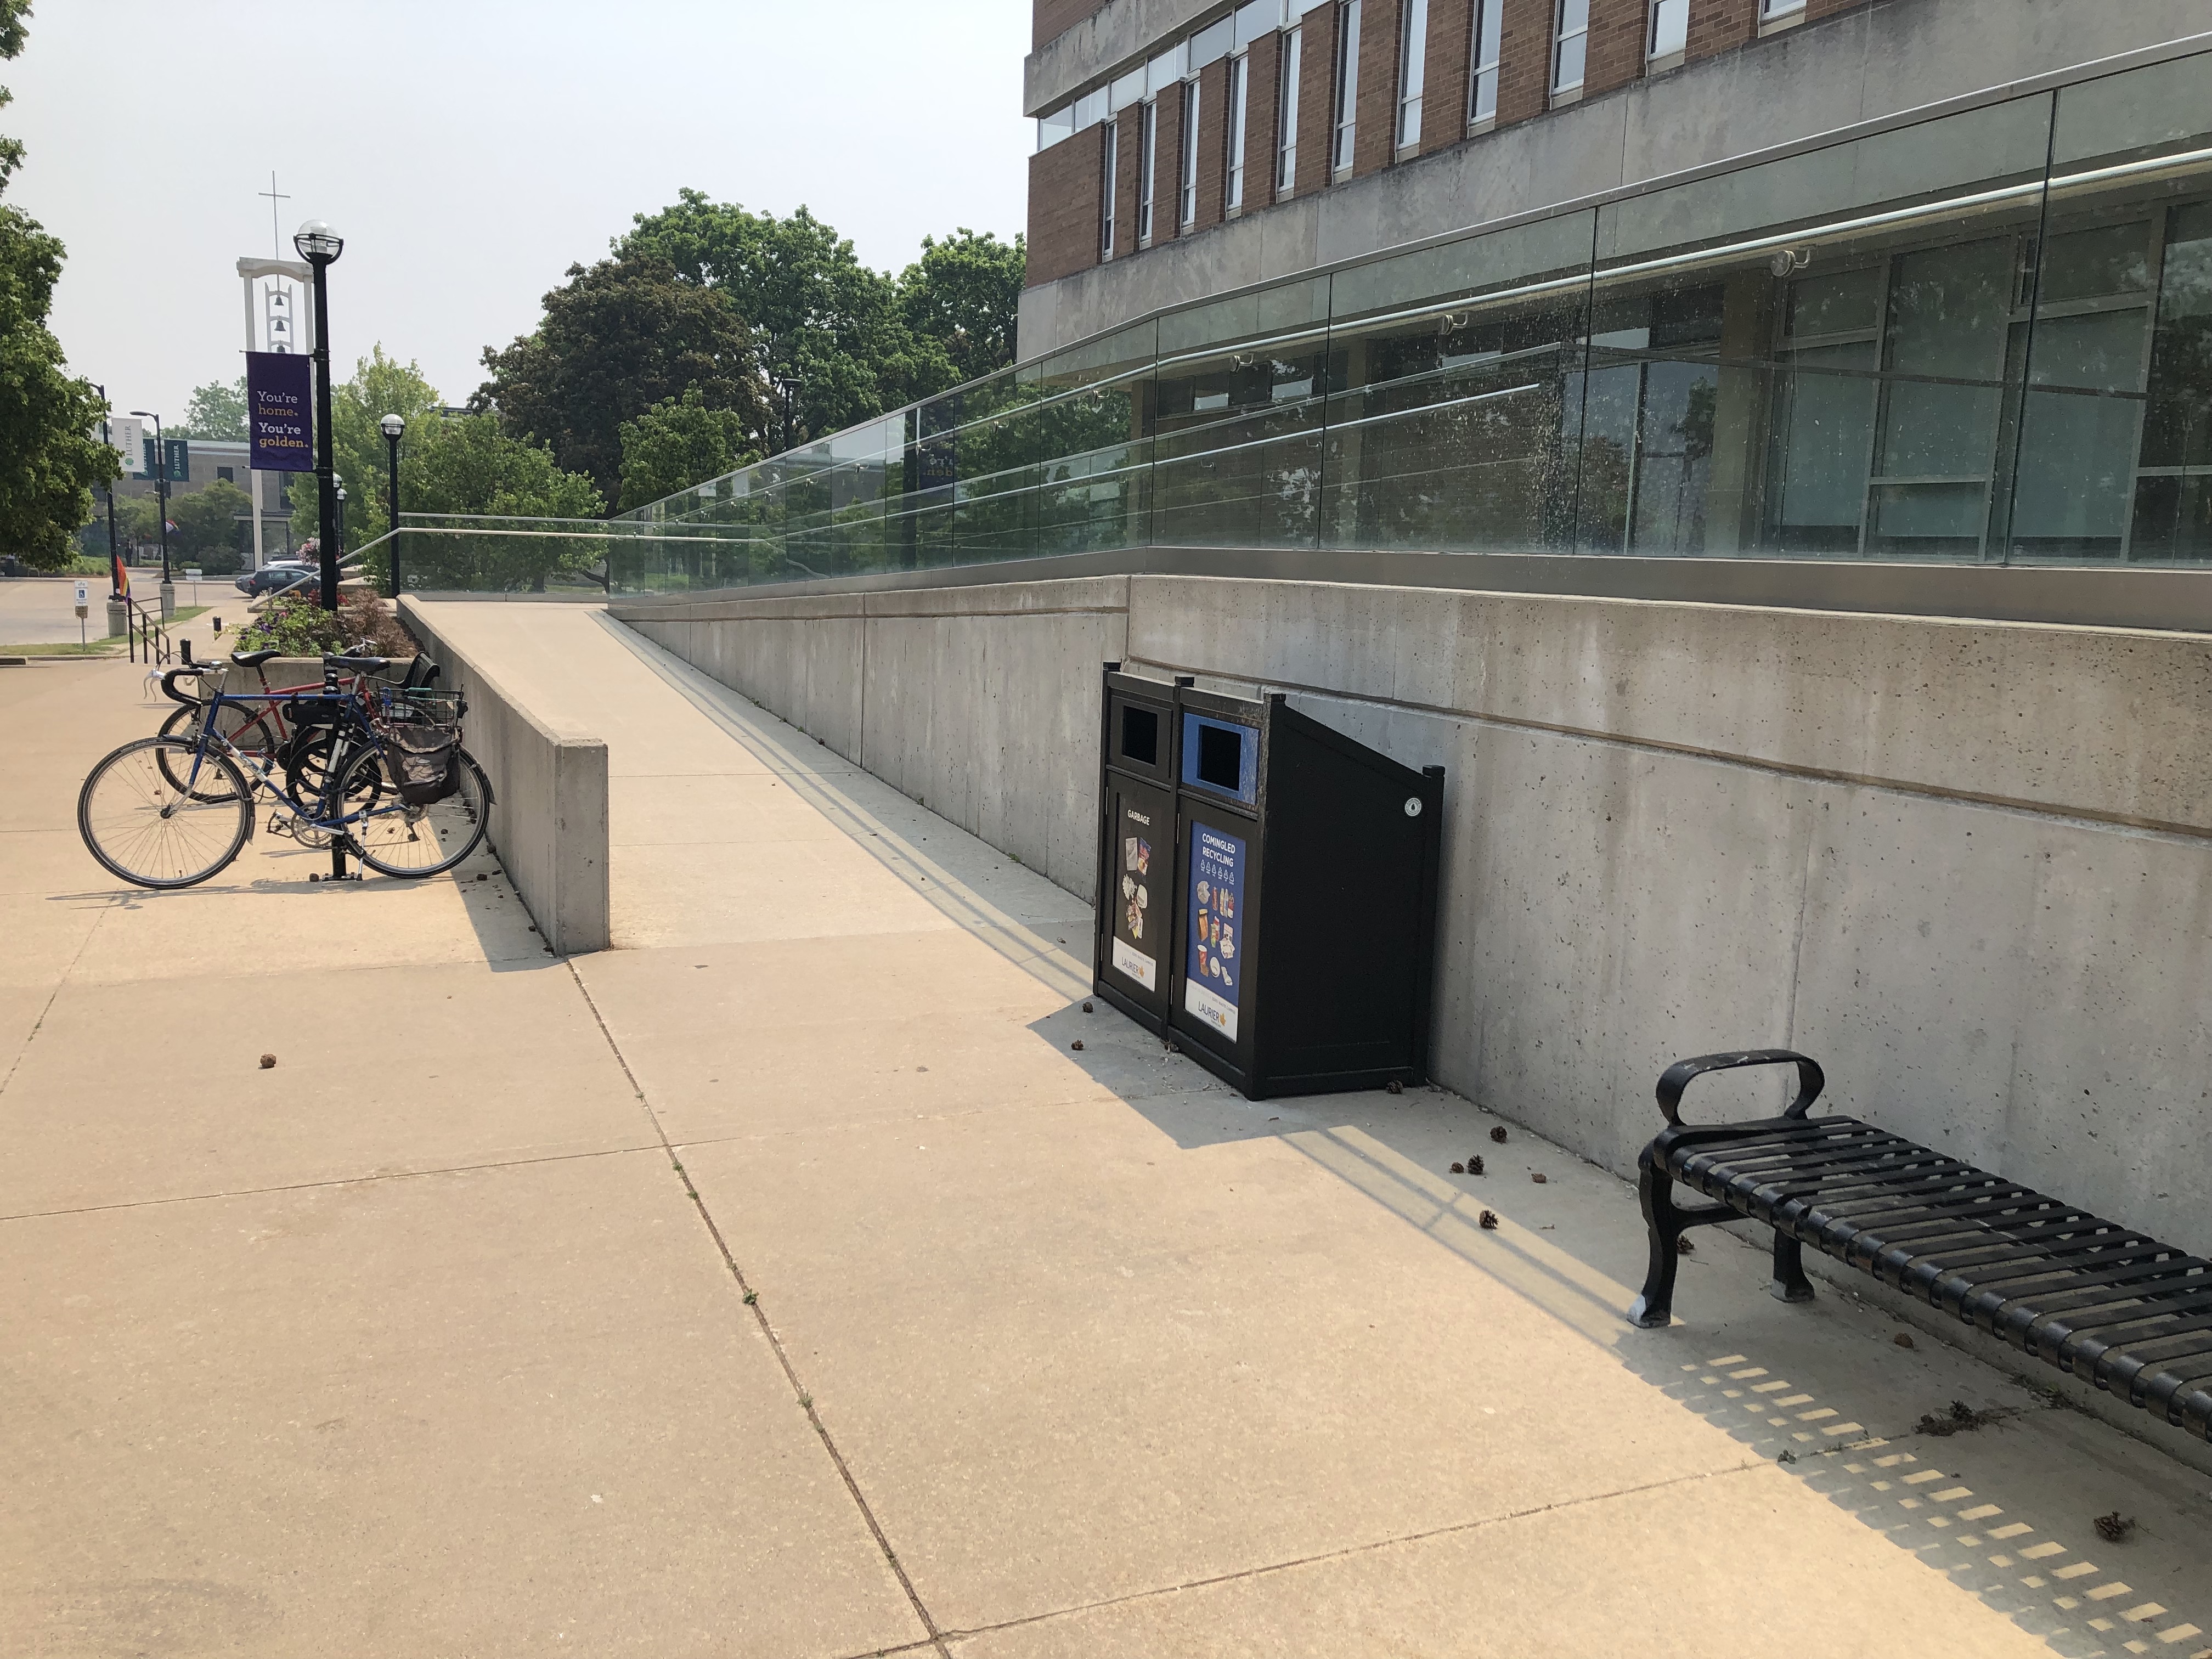 The ramp route. A bench, garbage and recycling containers are at the bottom of the ramp. The ramp leads to a mid-point, which turns around to a second ascending ramp.